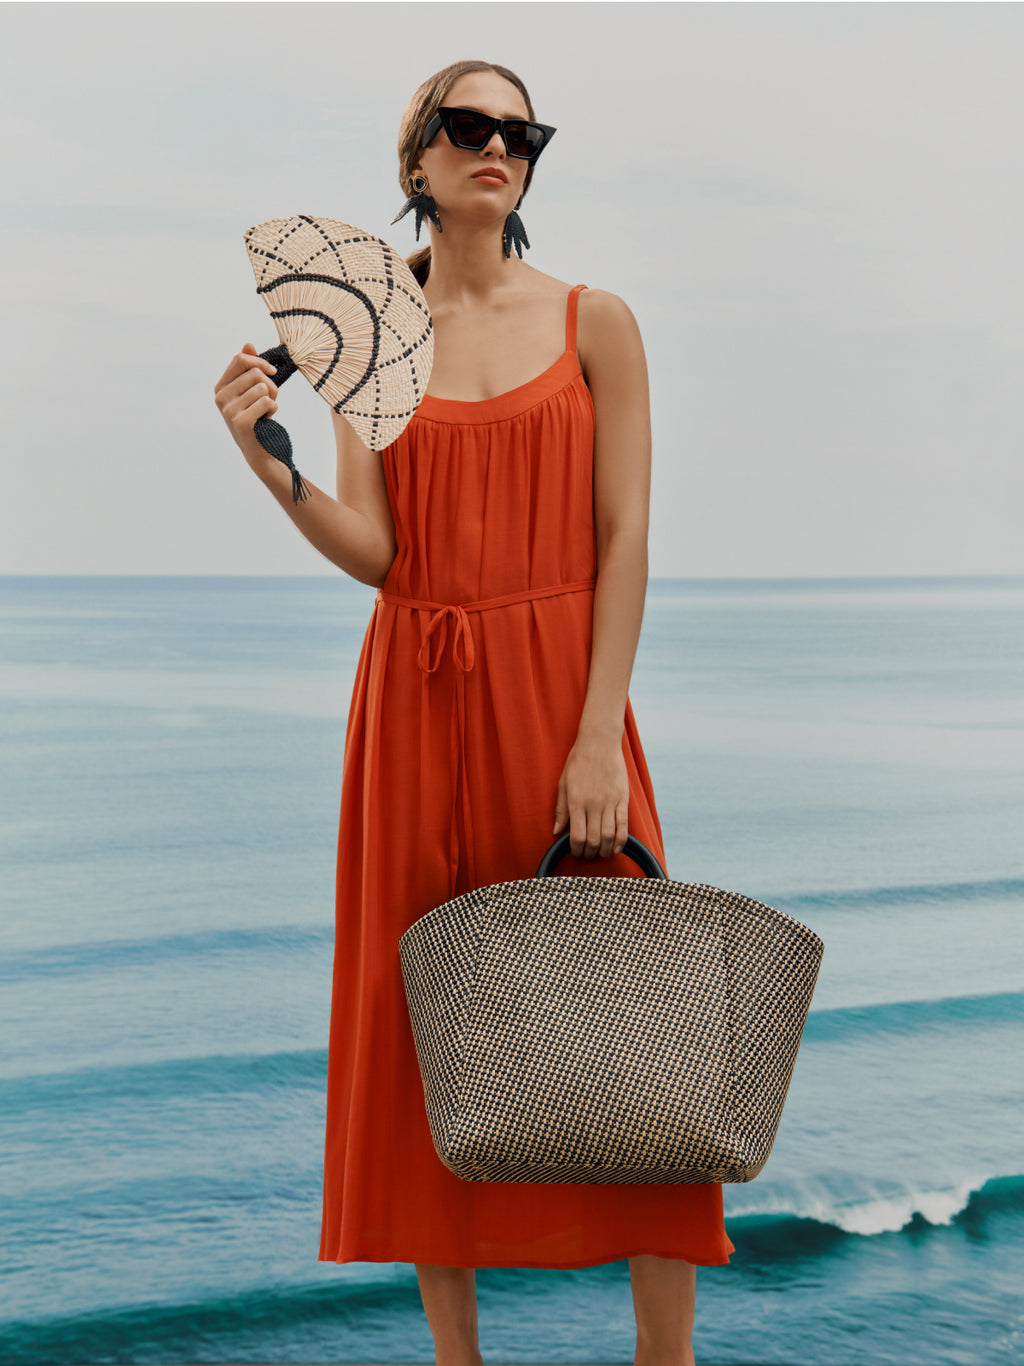 Person in a dress holding a hat and a large tote bag, standing in front of the ocean.